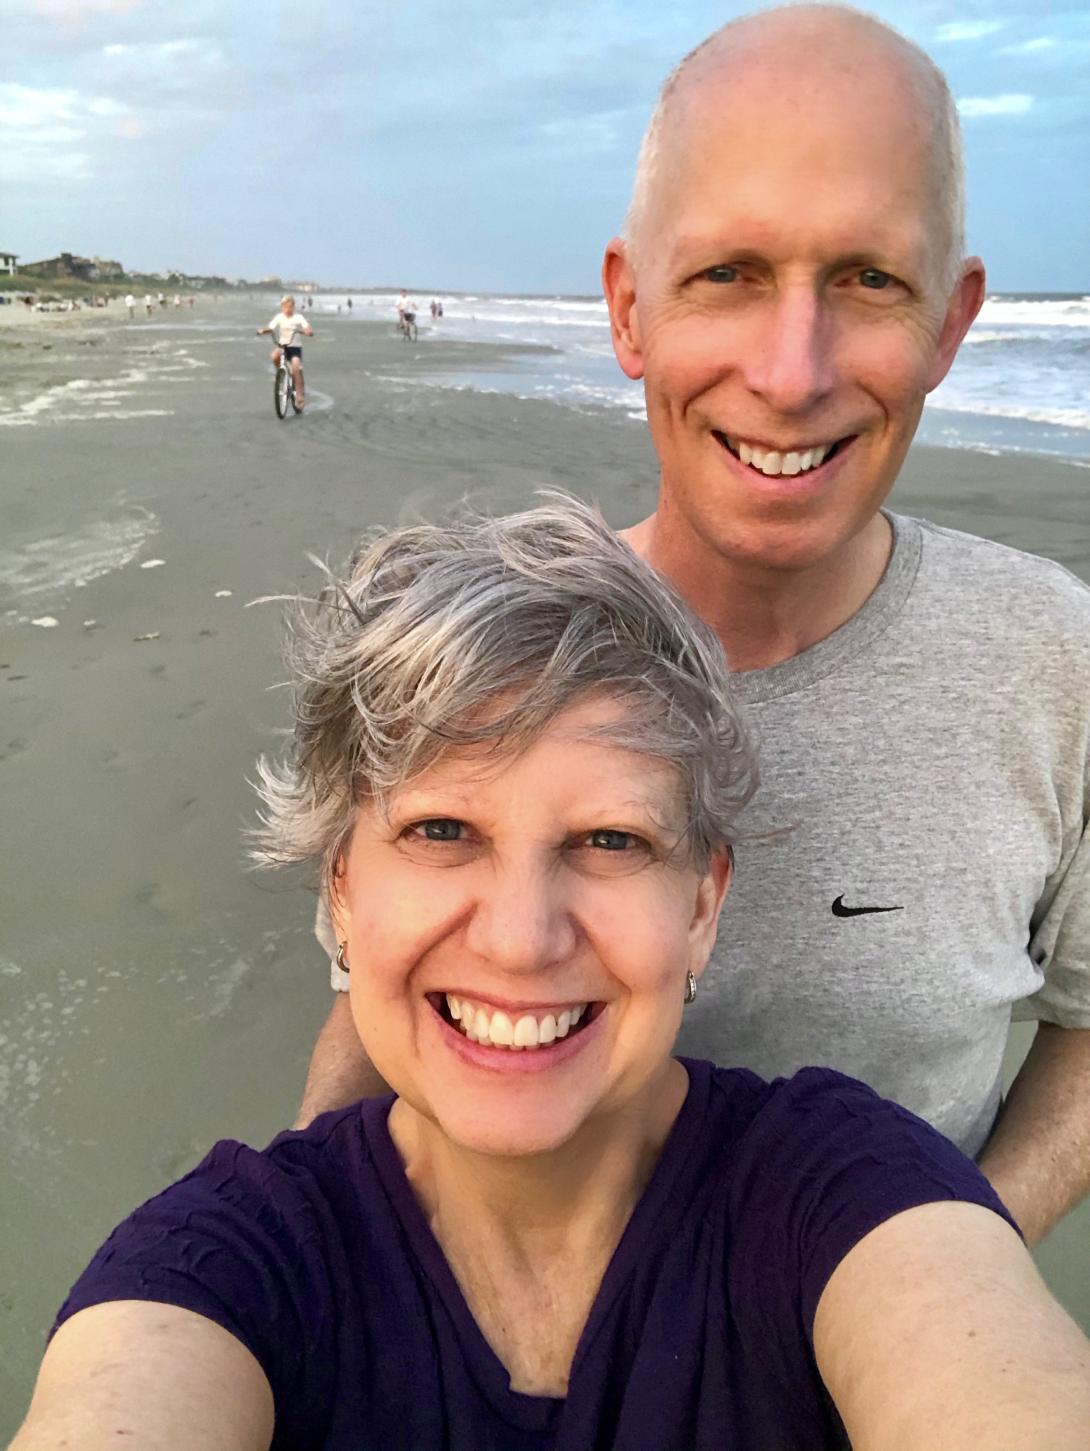 Kathy Jennings and her husband Spencer smile in a selfie on a beach in South Carolina.